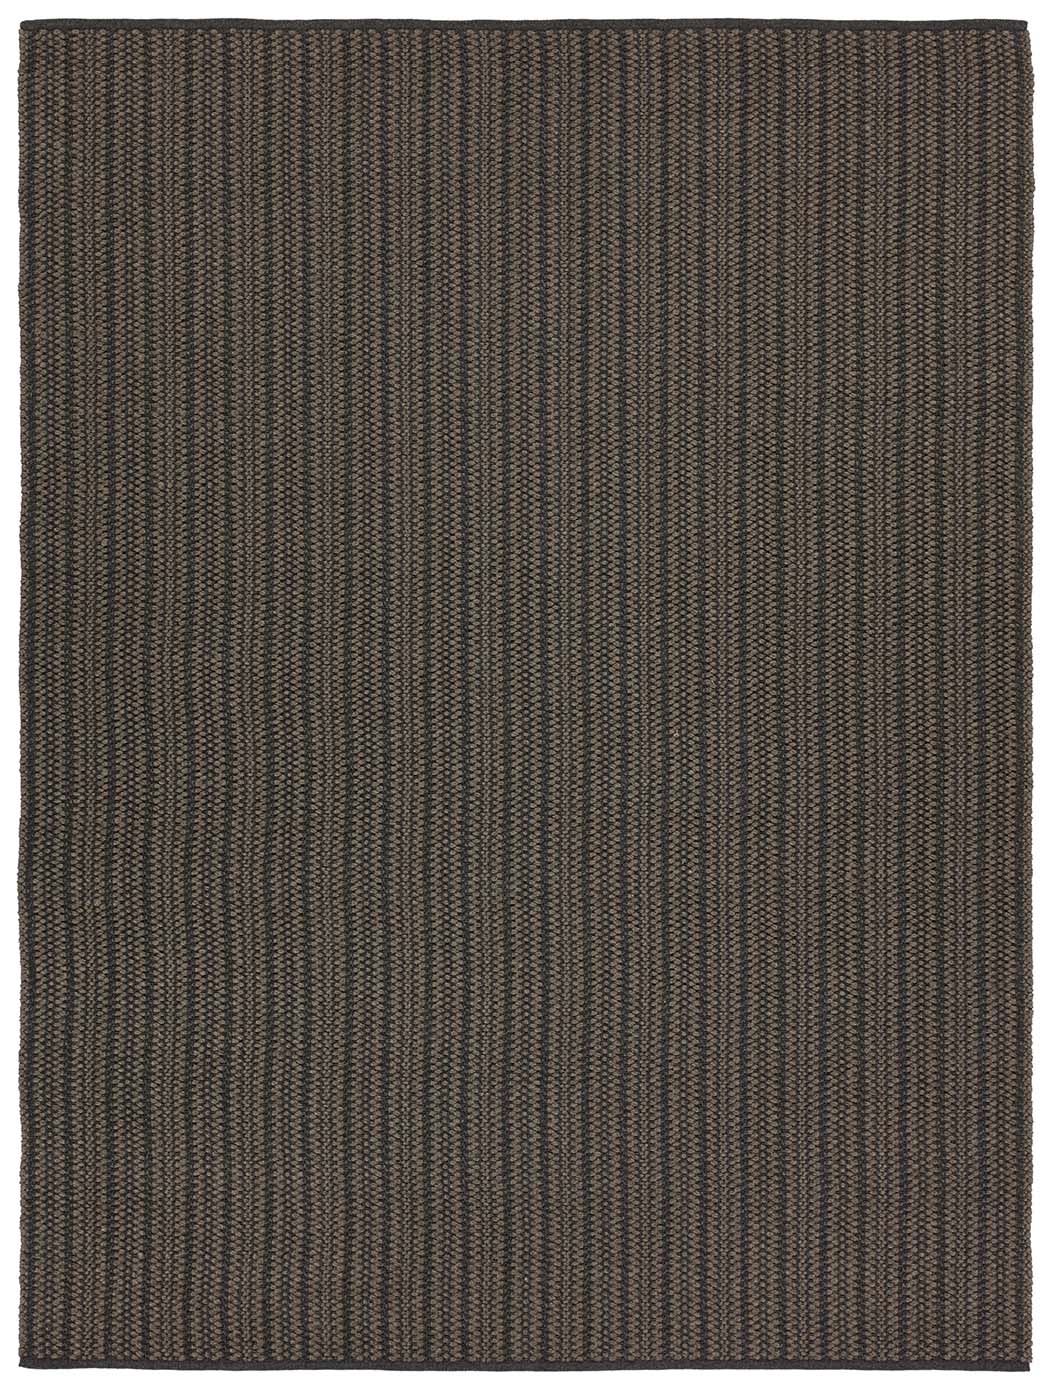 Jaipur Living Elmas Handmade Indoor/Outdoor Striped Gray/Charcoal Area Rug  Product Image